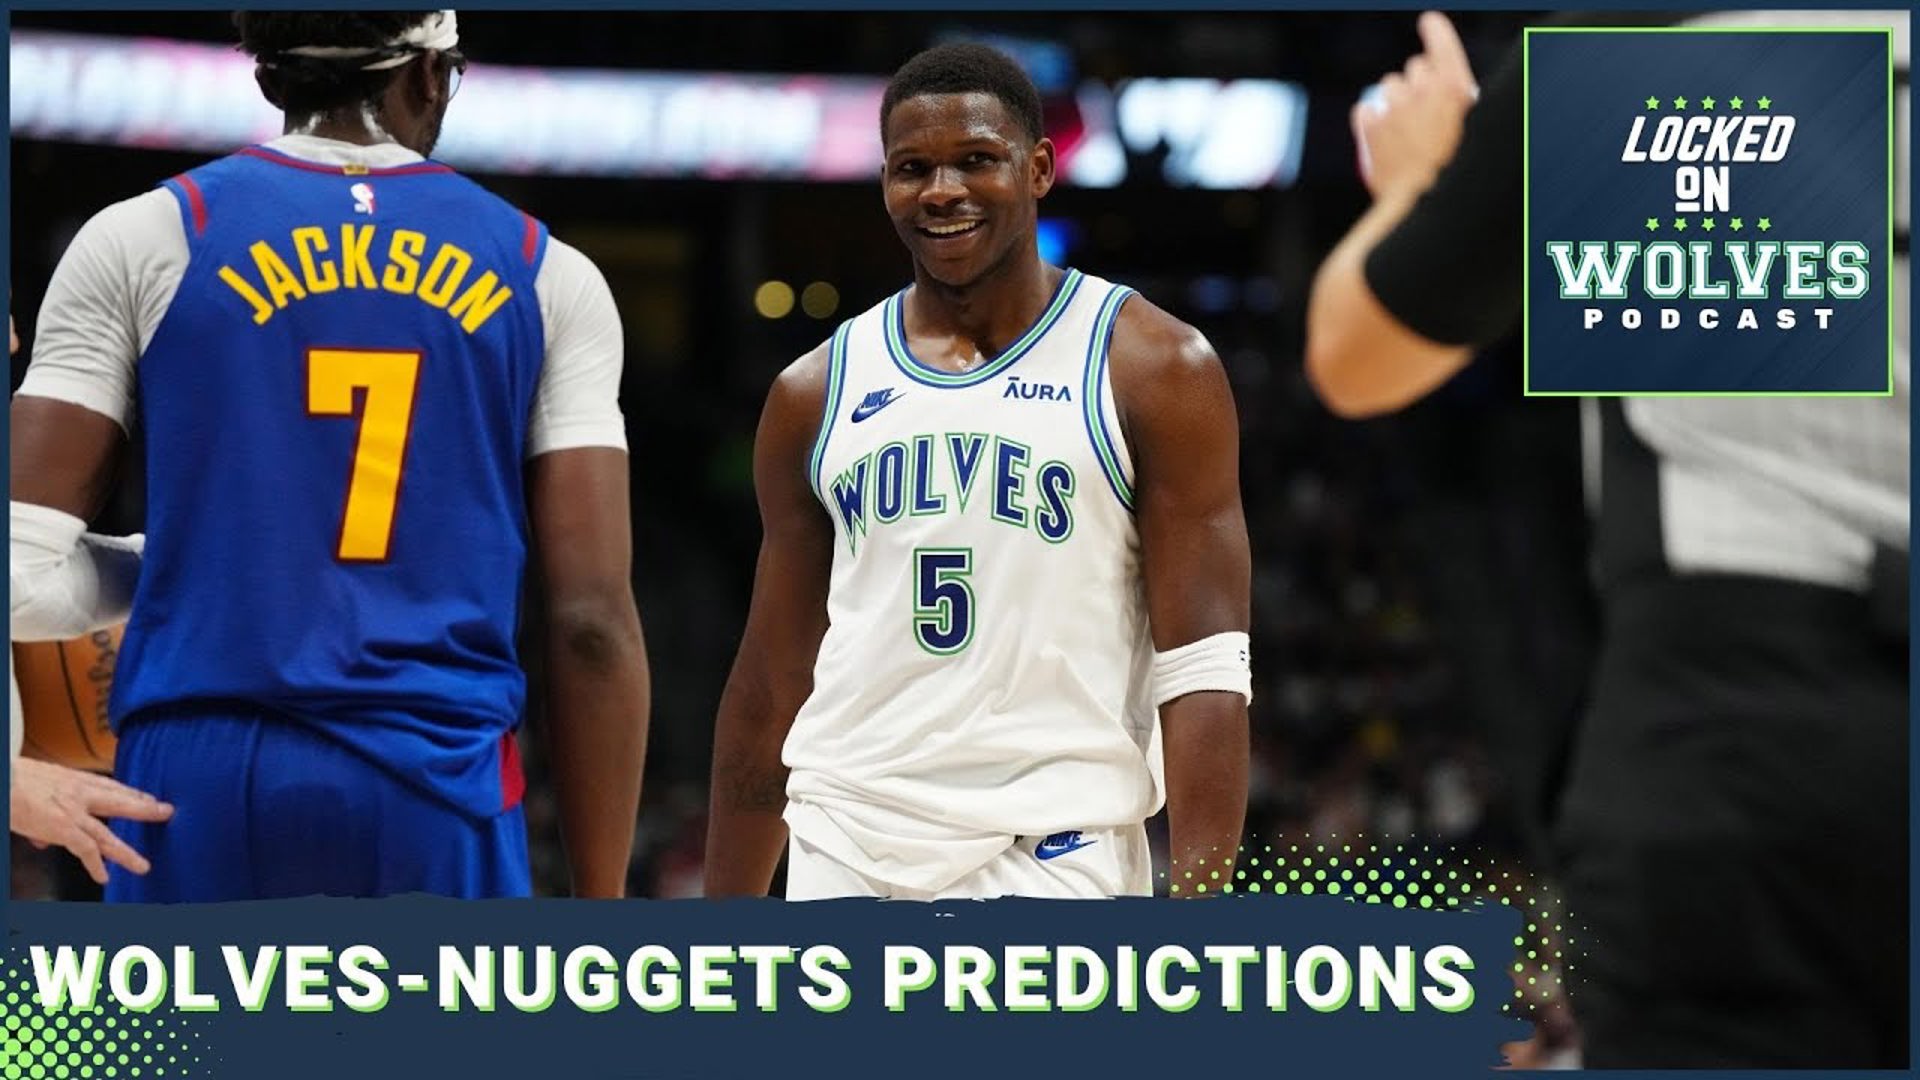 Final predictions and what to watch for in Minnesota Timberwolves vs. Denver Nuggets playoff series